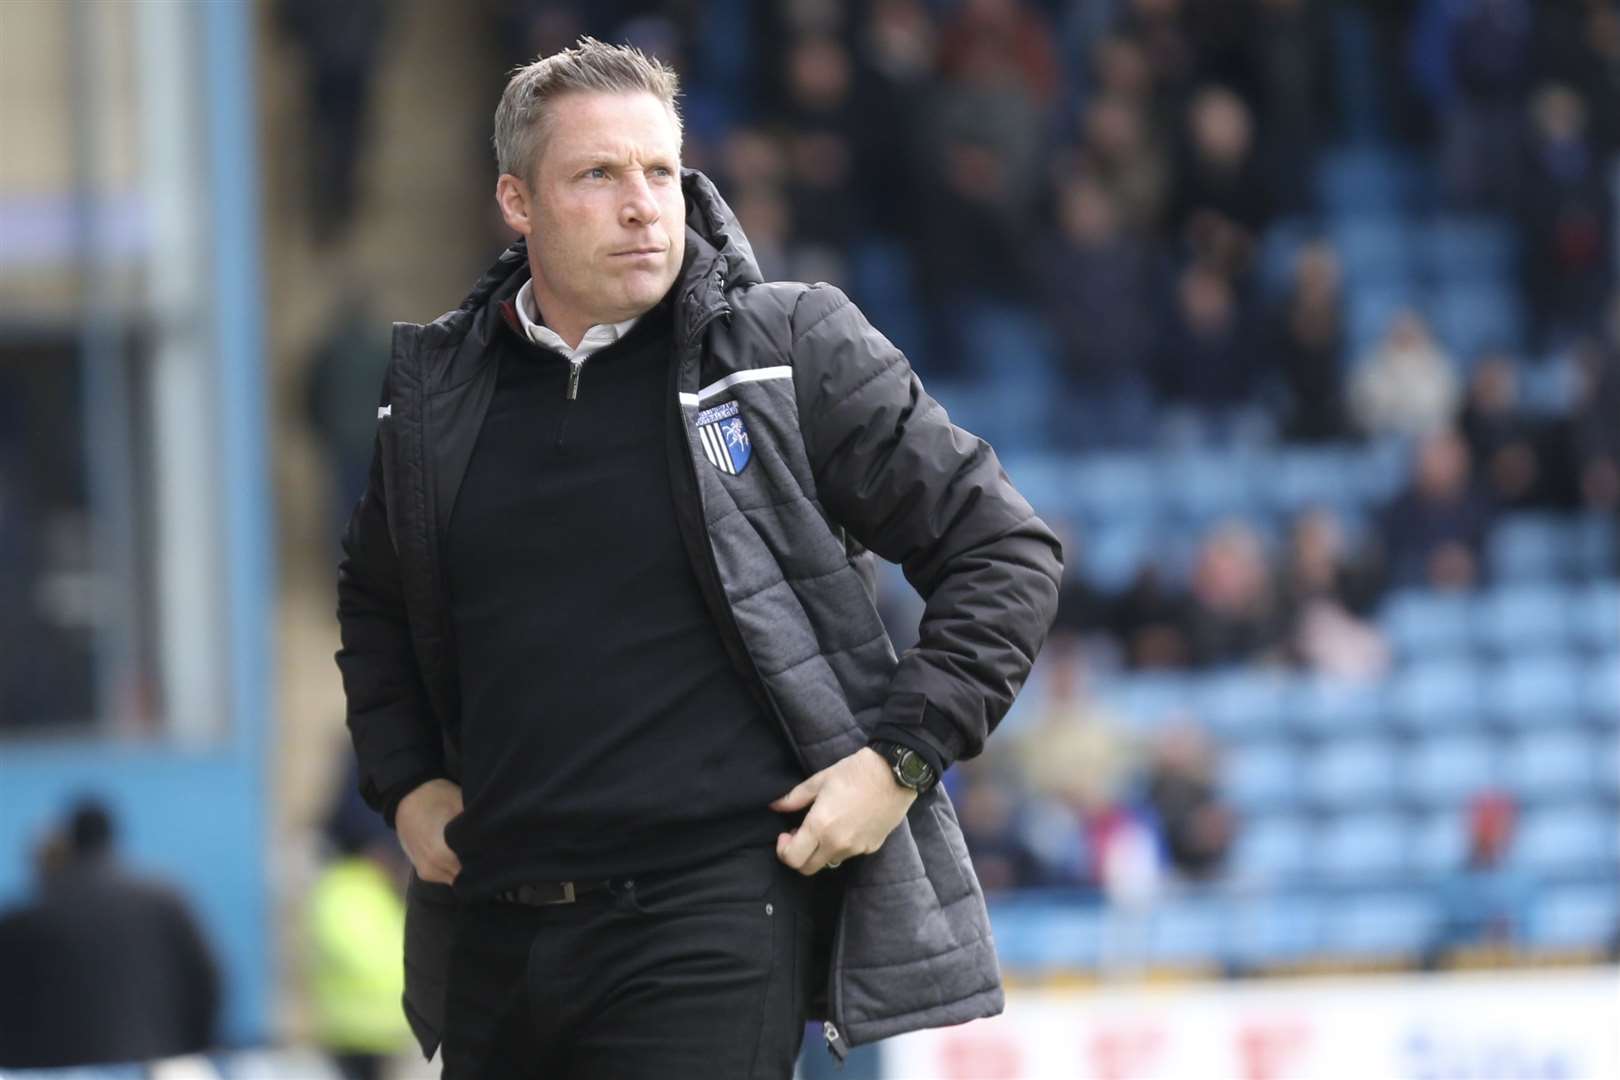 Gillingham manager Neil Harris has plenty to consider as fringe players push for action